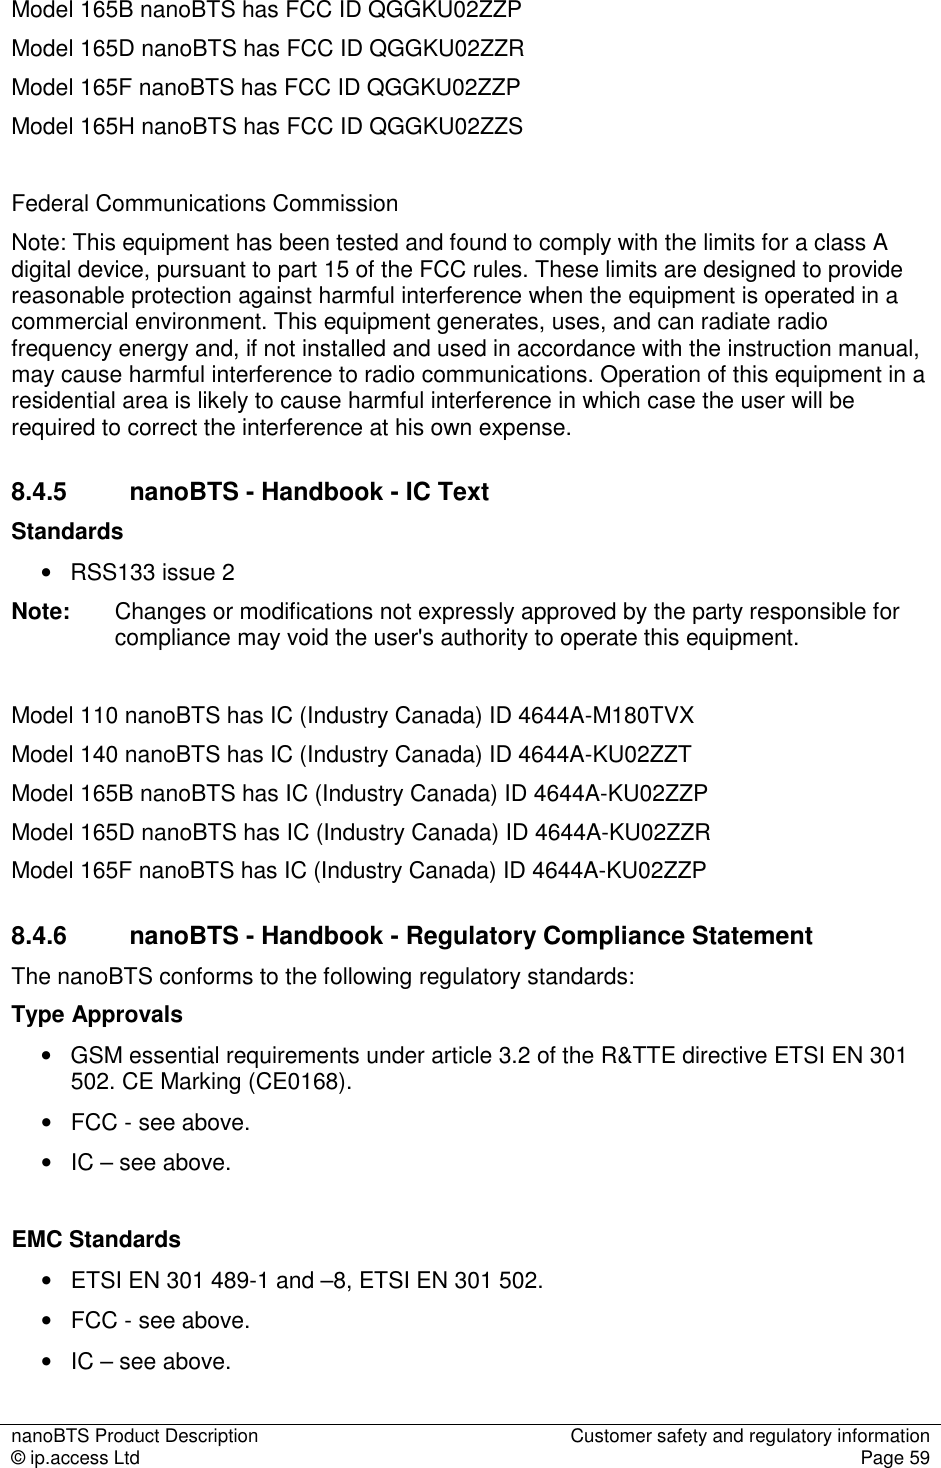 nanoBTS Product Description  Customer safety and regulatory information © ip.access Ltd  Page 59  Model 165B nanoBTS has FCC ID QGGKU02ZZP Model 165D nanoBTS has FCC ID QGGKU02ZZR Model 165F nanoBTS has FCC ID QGGKU02ZZP Model 165H nanoBTS has FCC ID QGGKU02ZZS  Federal Communications Commission Note: This equipment has been tested and found to comply with the limits for a class A digital device, pursuant to part 15 of the FCC rules. These limits are designed to provide reasonable protection against harmful interference when the equipment is operated in a commercial environment. This equipment generates, uses, and can radiate radio frequency energy and, if not installed and used in accordance with the instruction manual, may cause harmful interference to radio communications. Operation of this equipment in a residential area is likely to cause harmful interference in which case the user will be required to correct the interference at his own expense. 8.4.5  nanoBTS - Handbook - IC Text Standards •  RSS133 issue 2 Note:  Changes or modifications not expressly approved by the party responsible for compliance may void the user&apos;s authority to operate this equipment.  Model 110 nanoBTS has IC (Industry Canada) ID 4644A-M180TVX Model 140 nanoBTS has IC (Industry Canada) ID 4644A-KU02ZZT Model 165B nanoBTS has IC (Industry Canada) ID 4644A-KU02ZZP Model 165D nanoBTS has IC (Industry Canada) ID 4644A-KU02ZZR Model 165F nanoBTS has IC (Industry Canada) ID 4644A-KU02ZZP 8.4.6  nanoBTS - Handbook - Regulatory Compliance Statement The nanoBTS conforms to the following regulatory standards: Type Approvals •   GSM essential requirements under article 3.2 of the R&amp;TTE directive ETSI EN 301 502. CE Marking (CE0168). •   FCC - see above. •   IC – see above.  EMC Standards  •   ETSI EN 301 489-1 and –8, ETSI EN 301 502.  •   FCC - see above. •   IC – see above. 